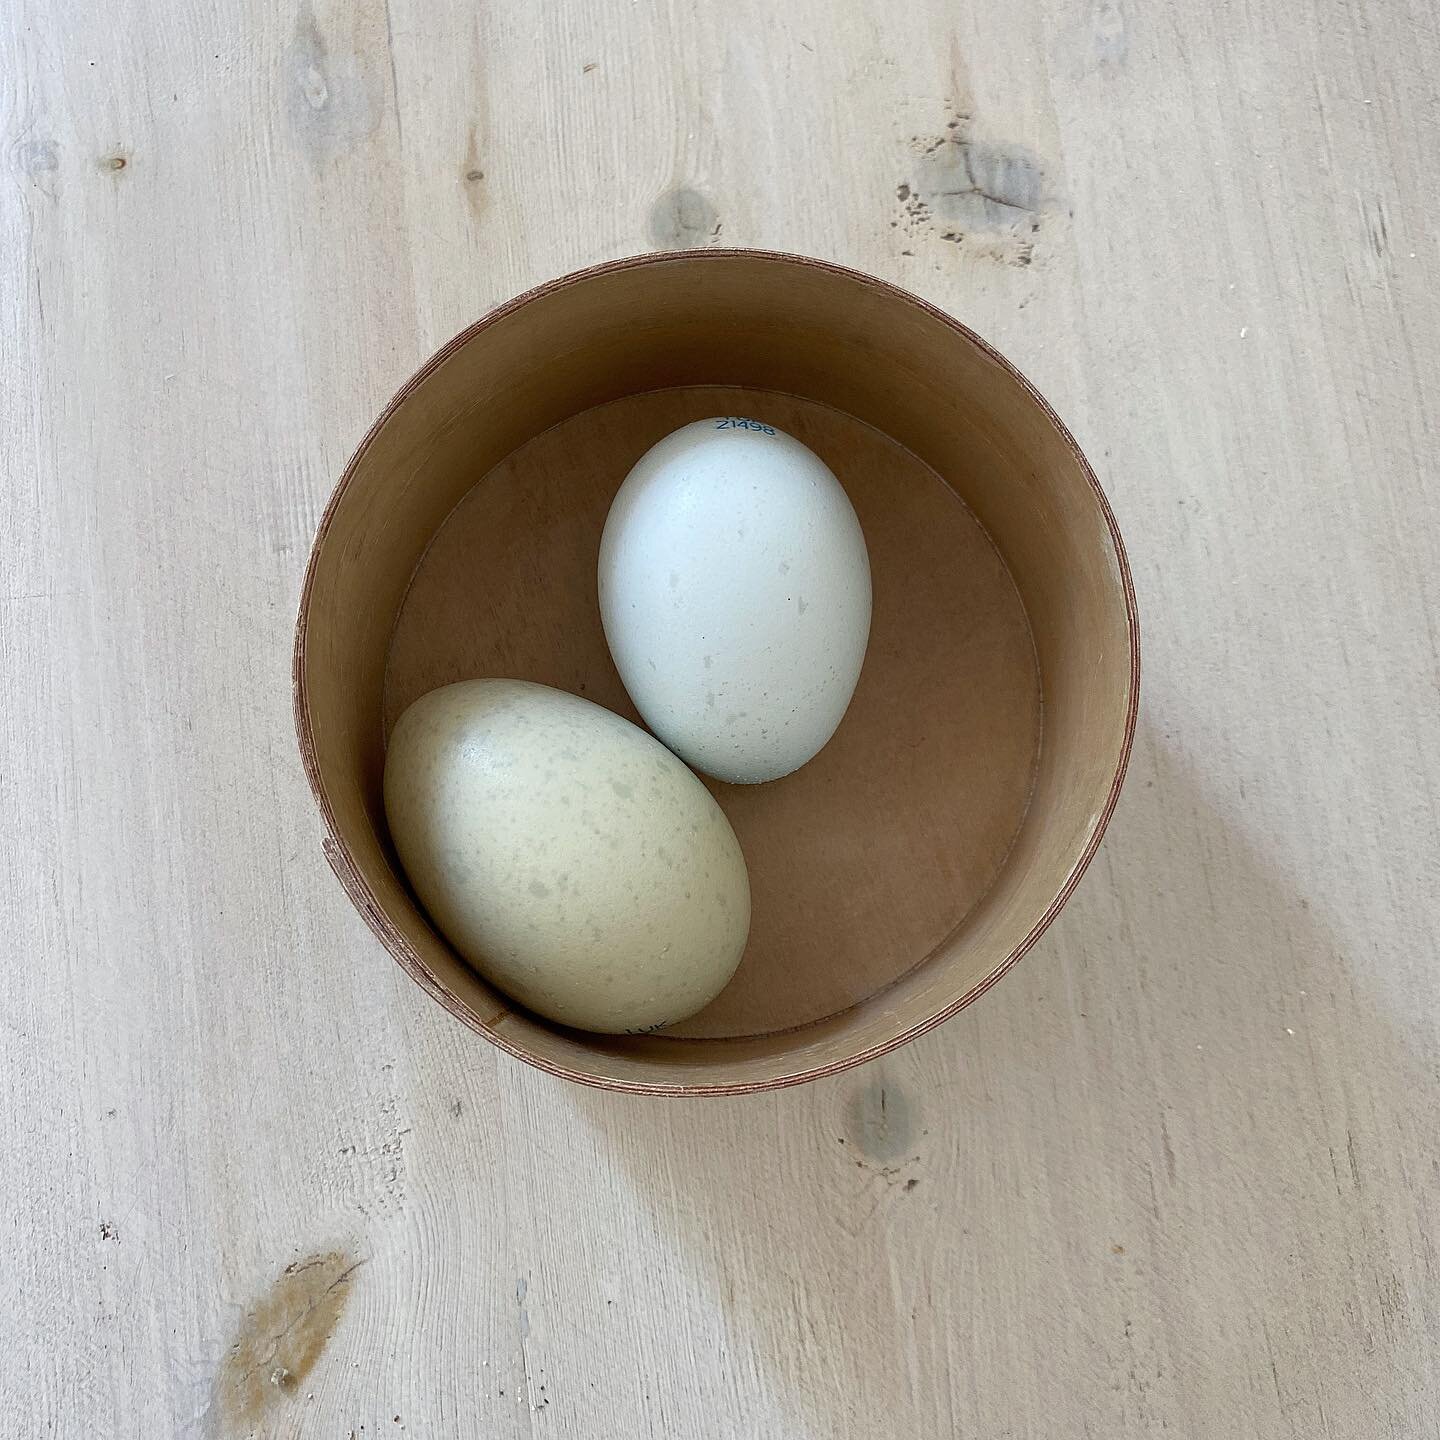 Breakfast. Bowl by Roger, eggs Cotswold Legbar. #eggs #hens #bowl #minimal #breakfast #craftsman #wood #minimalism #inmyhome #inmykitchen #photography #nofilters